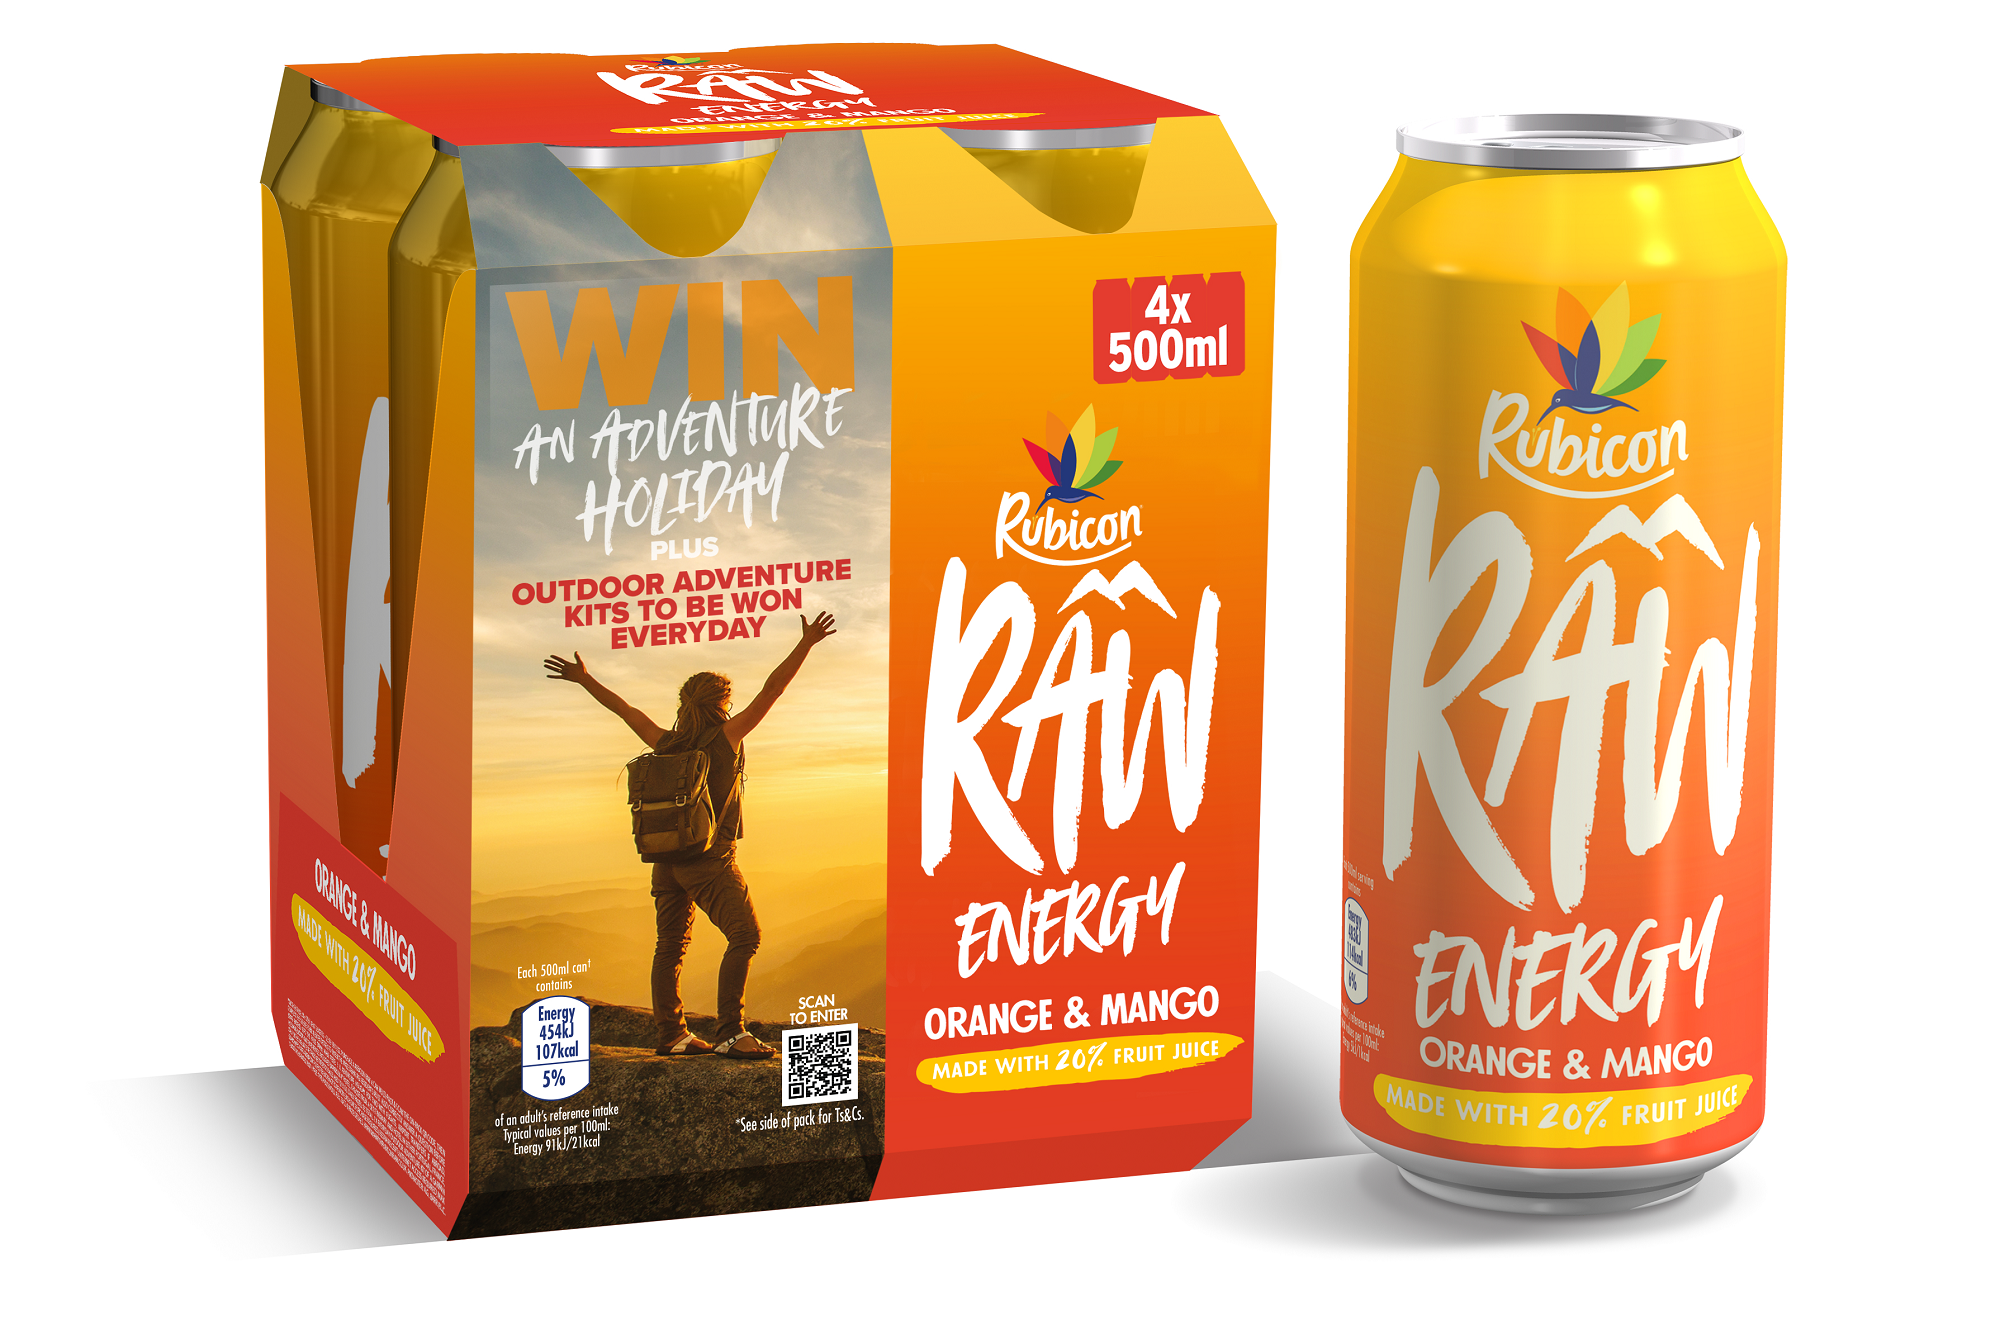 Rubicon RAW launches two new shopper promotions